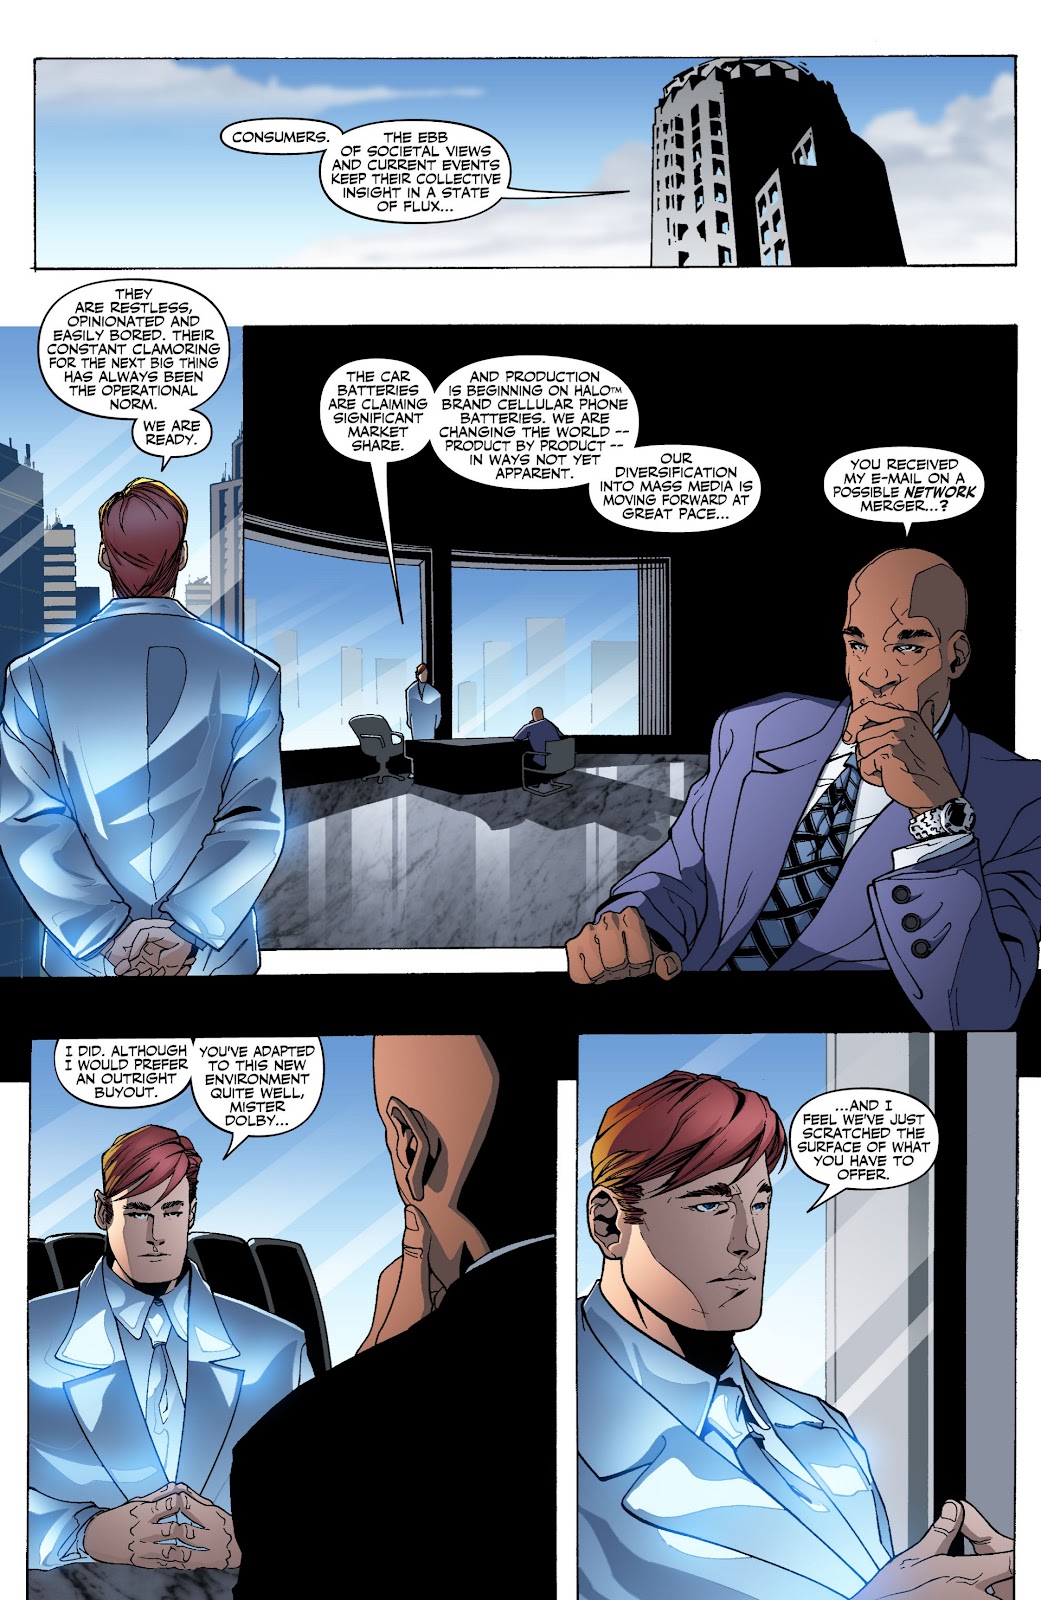 Wildcats Version 3.0 Issue #4 #4 - English 2